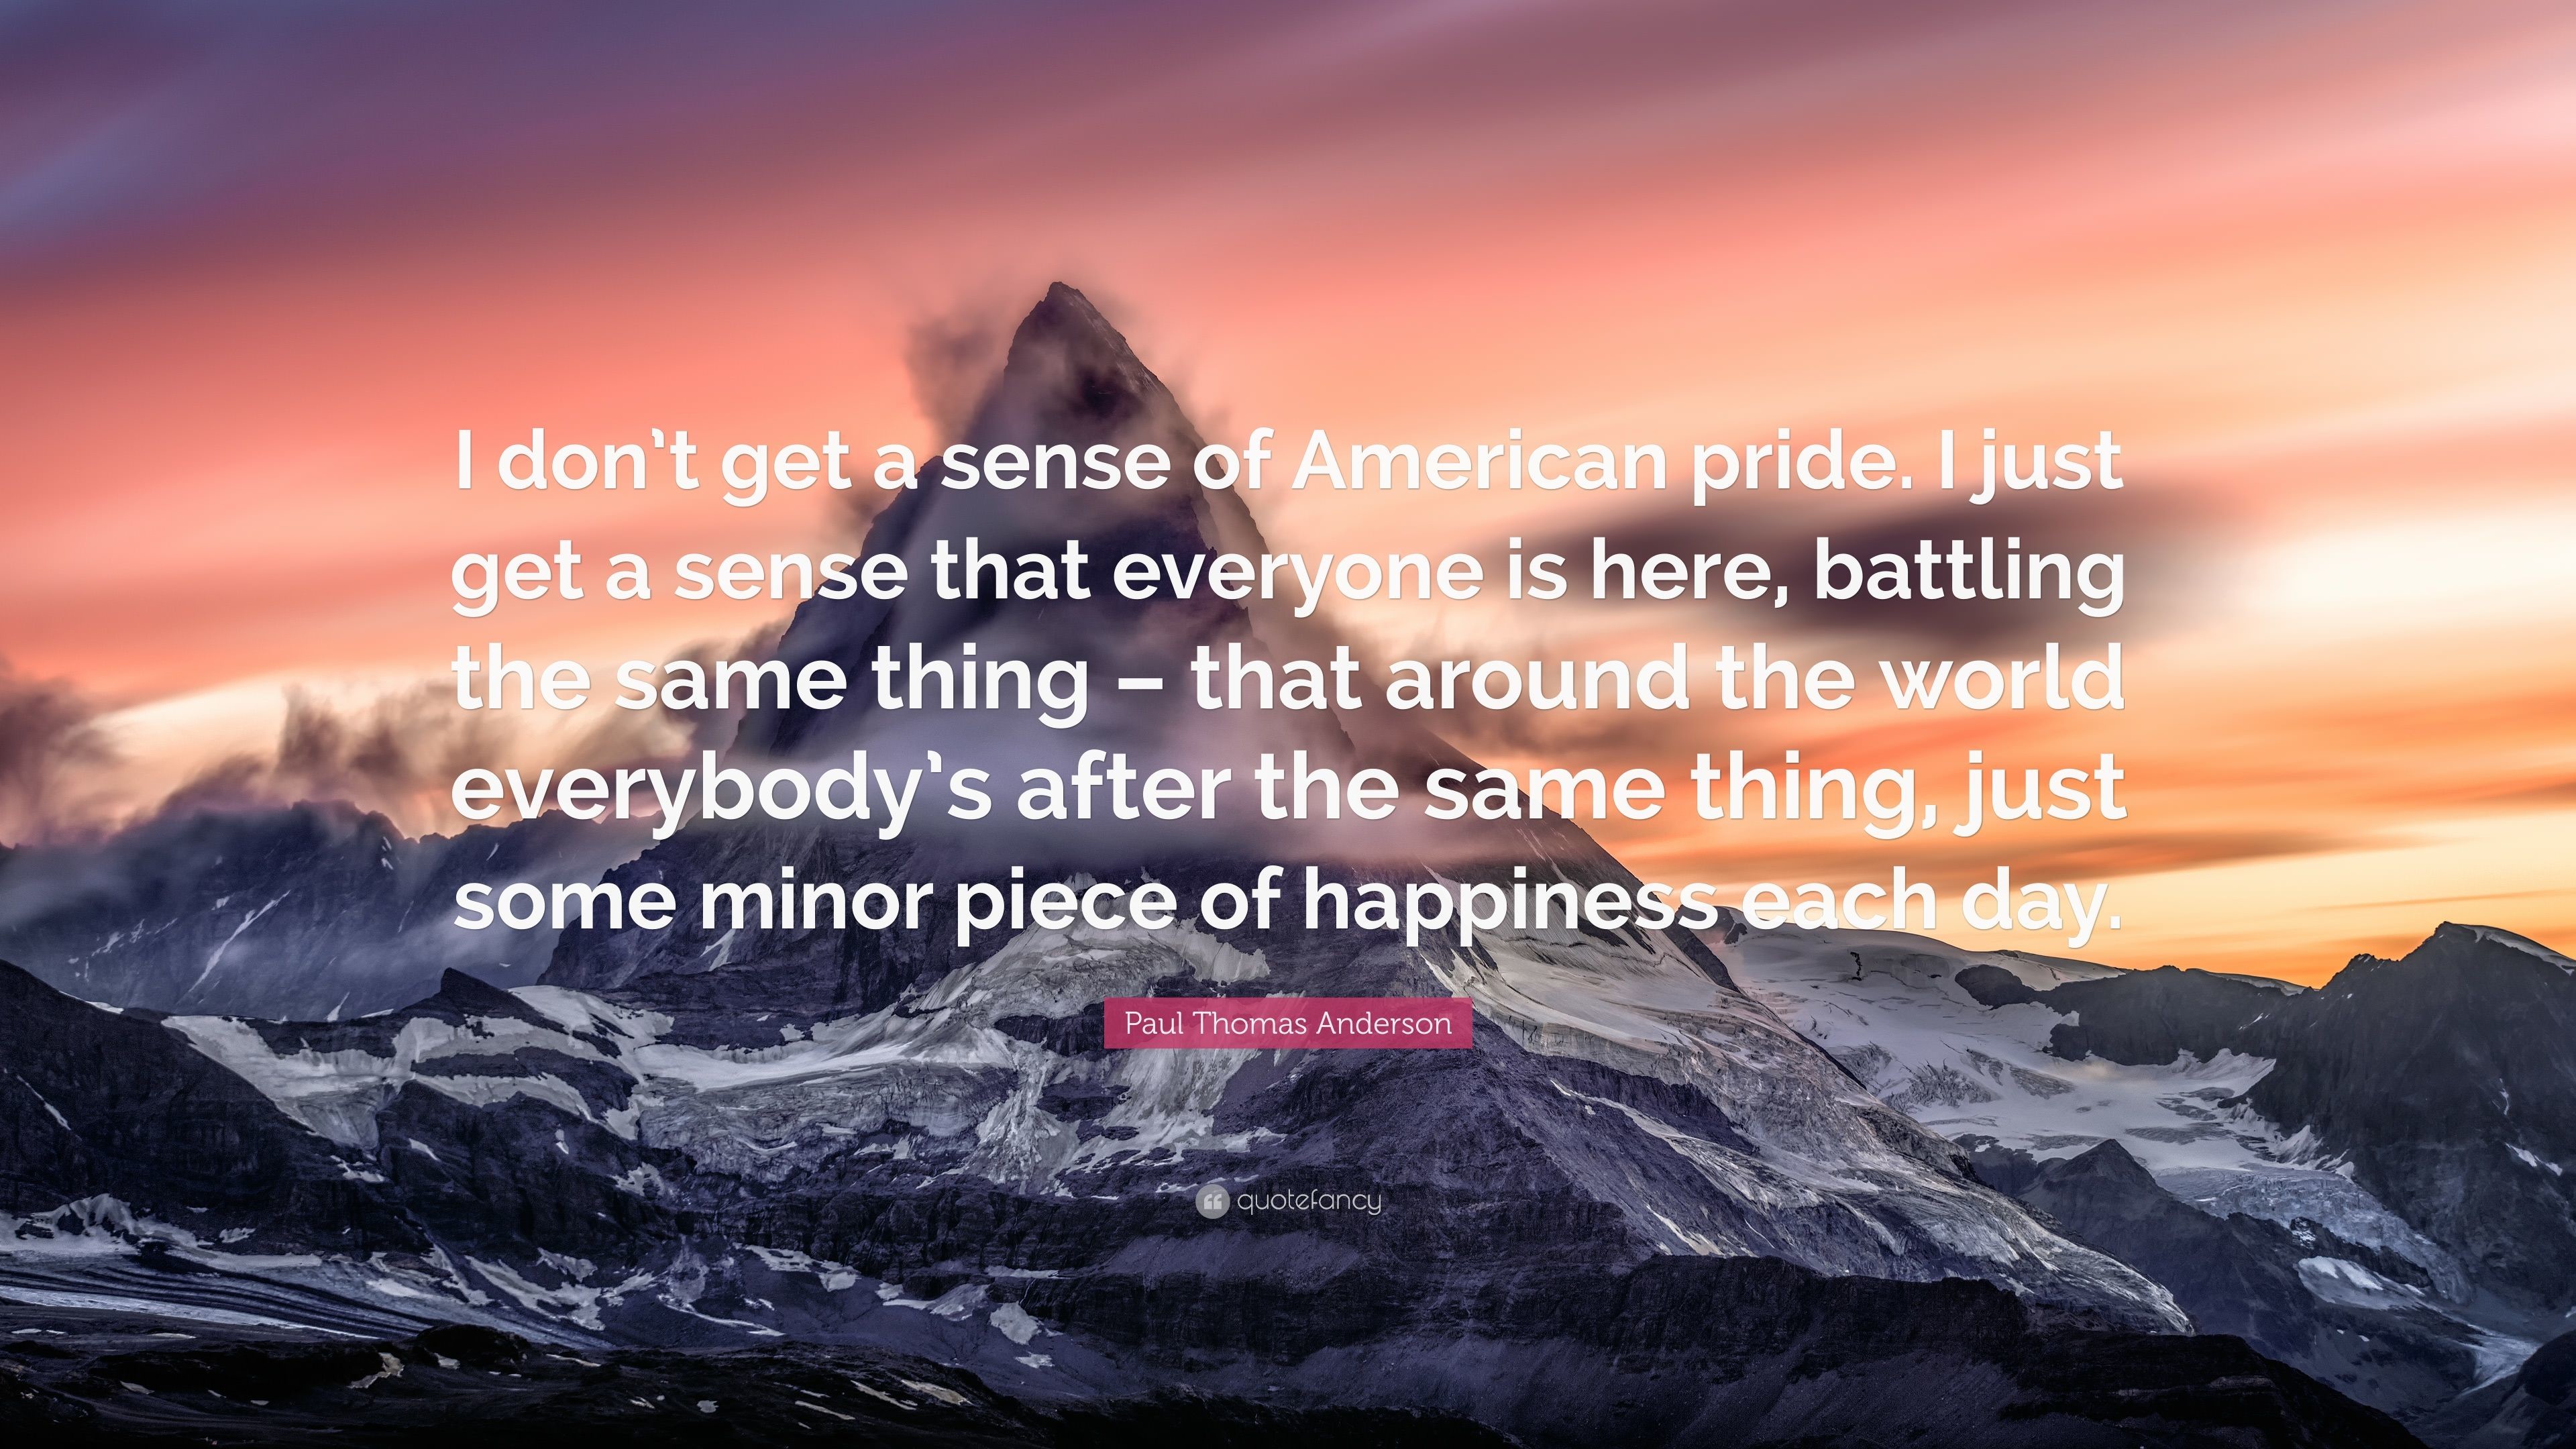 3840x2160 Paul Thomas Anderson Quote: “I don't get a sense of American pride